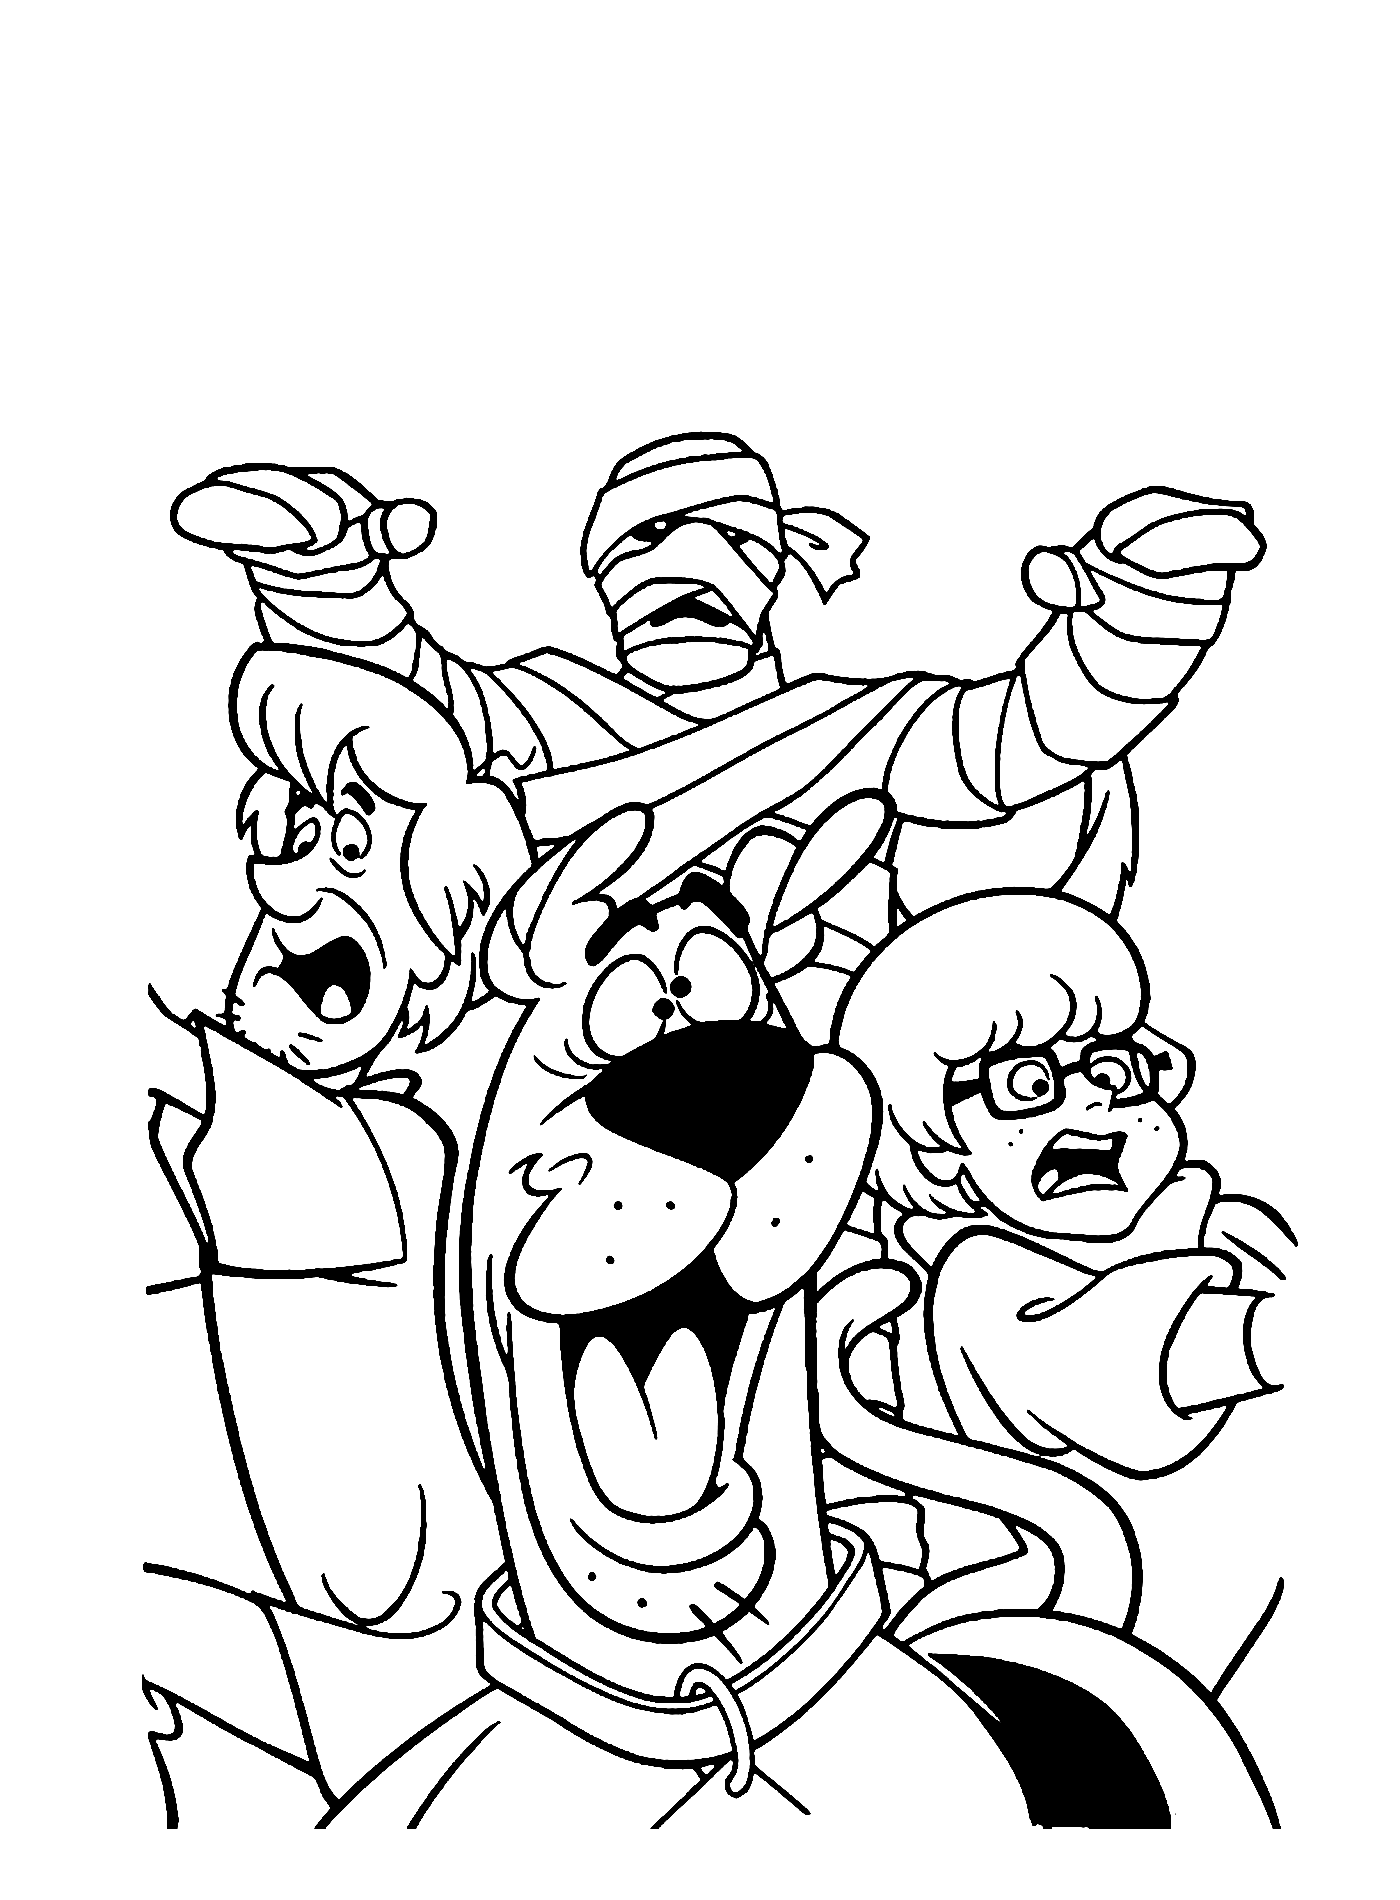 Halloween Scooby Doo Mummy Monster Coloring Page